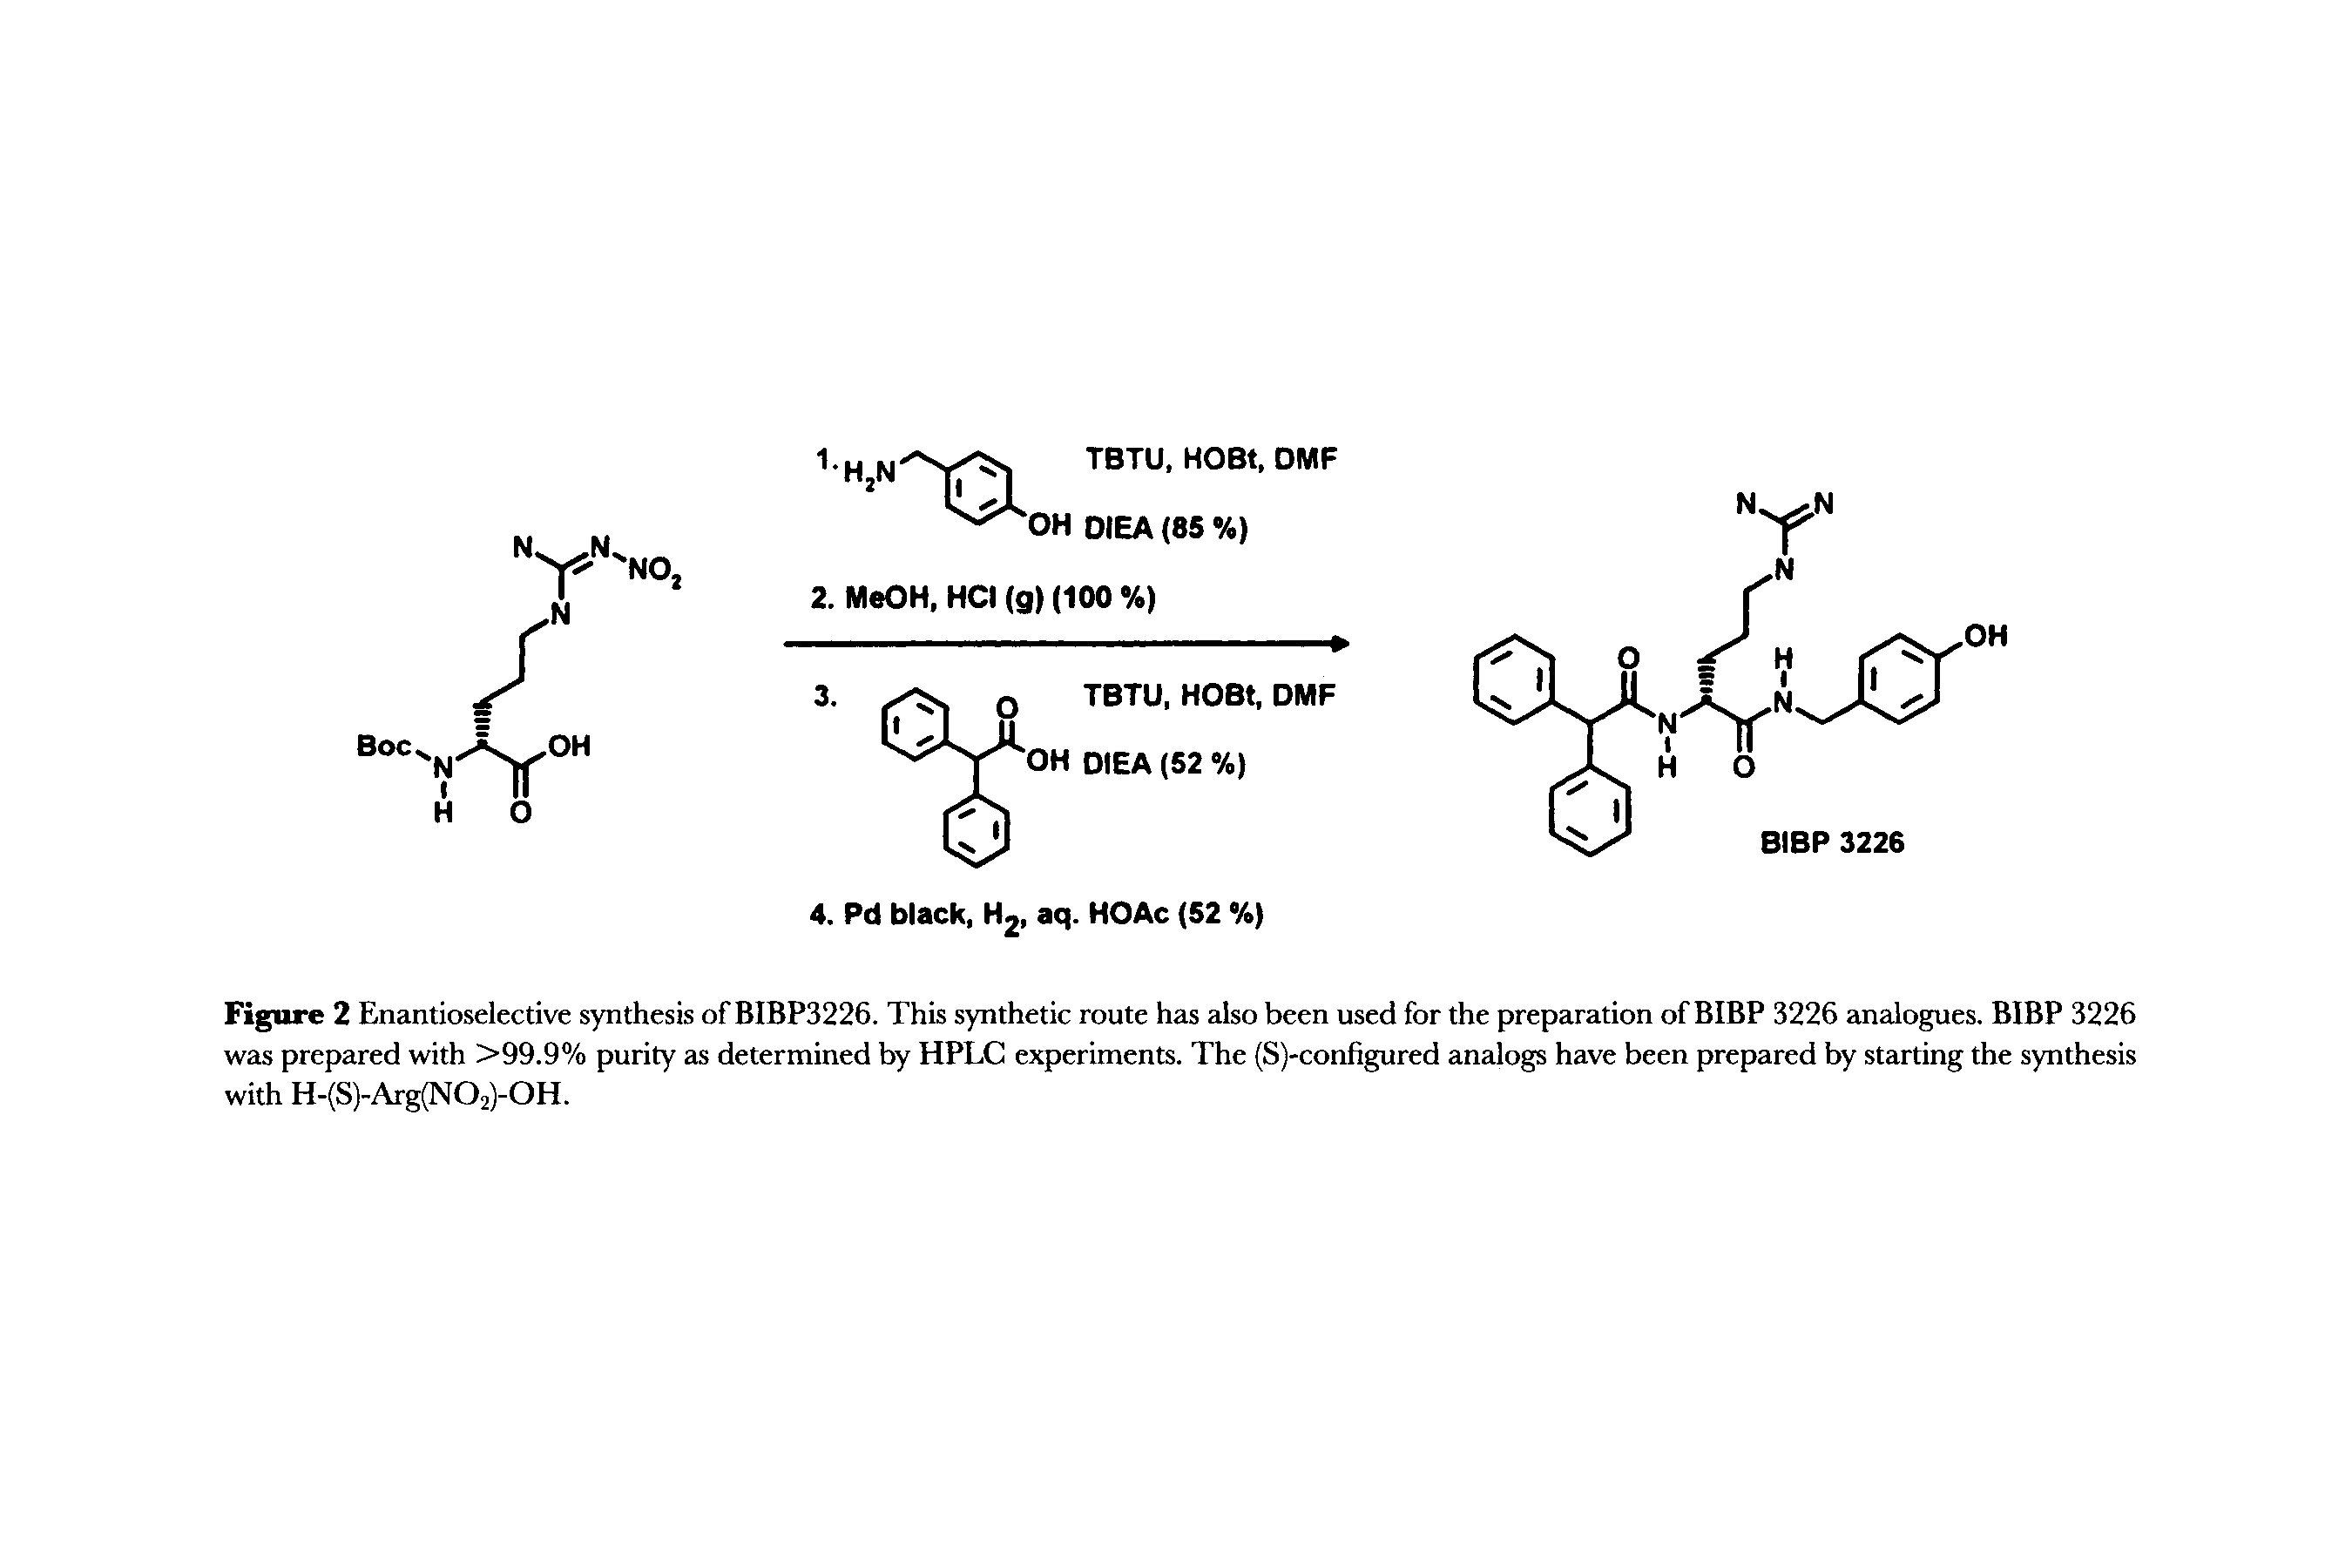 Figure 2 Enantioselective synthesis of BIBP3226. This synthetic route has also been used for the preparation of BIBP 3226 analogues. BIBP 3226 was prepared with >99.9% purity as determined by HPLC experiments. The (S)-configured analogs have been prepared by starting the synthesis with H-(S)-Arg(N02)-0H.